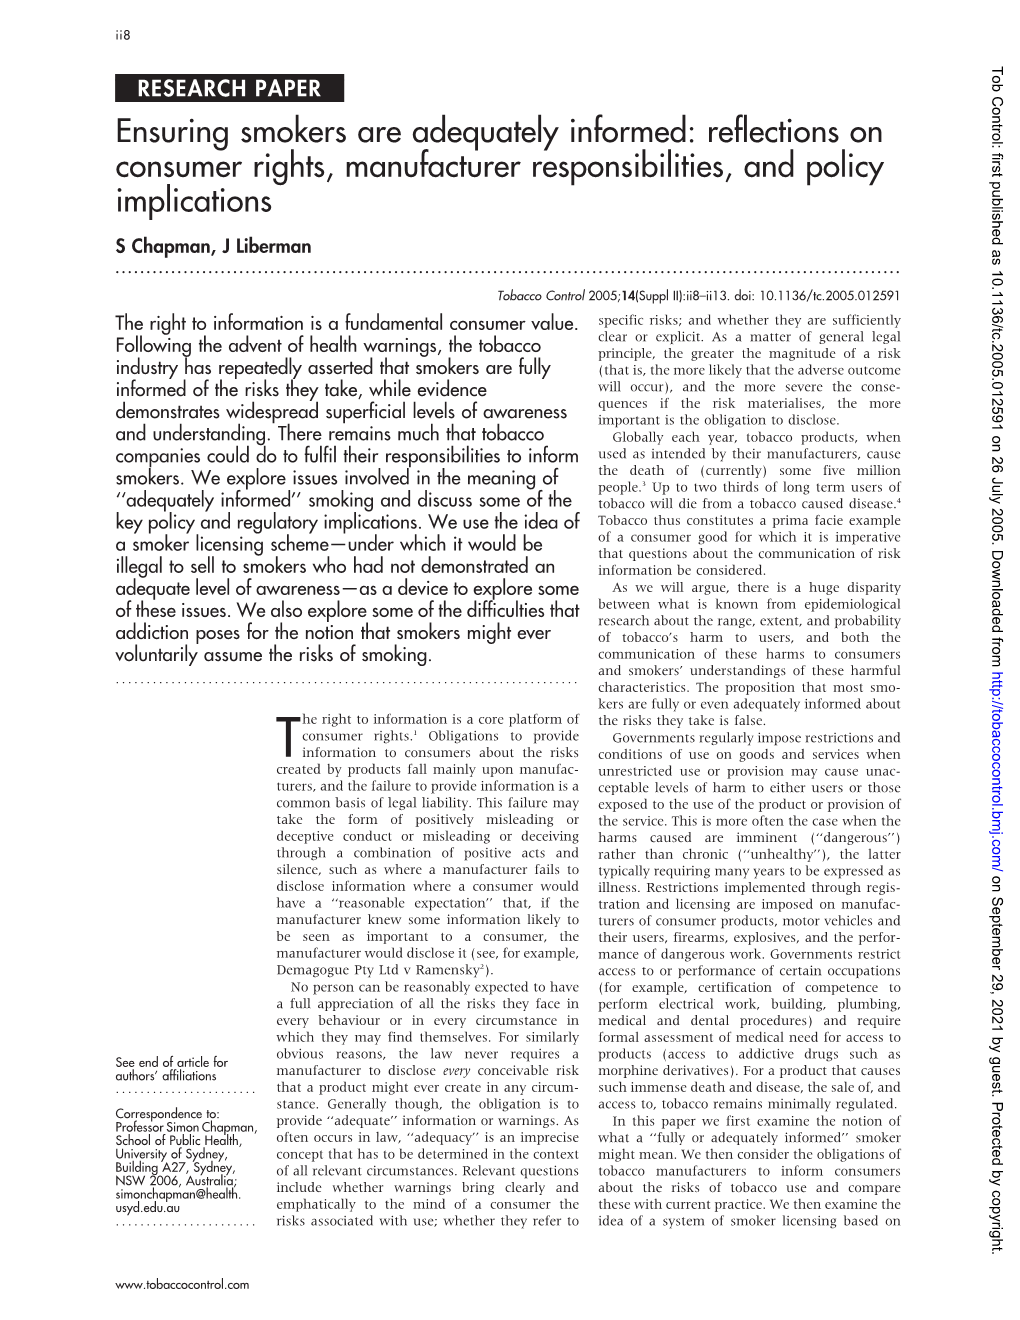 Ensuring Smokers Are Adequately Informed: Reflections on Consumer Rights, Manufacturer Responsibilities, and Policy Implications S Chapman, J Liberman